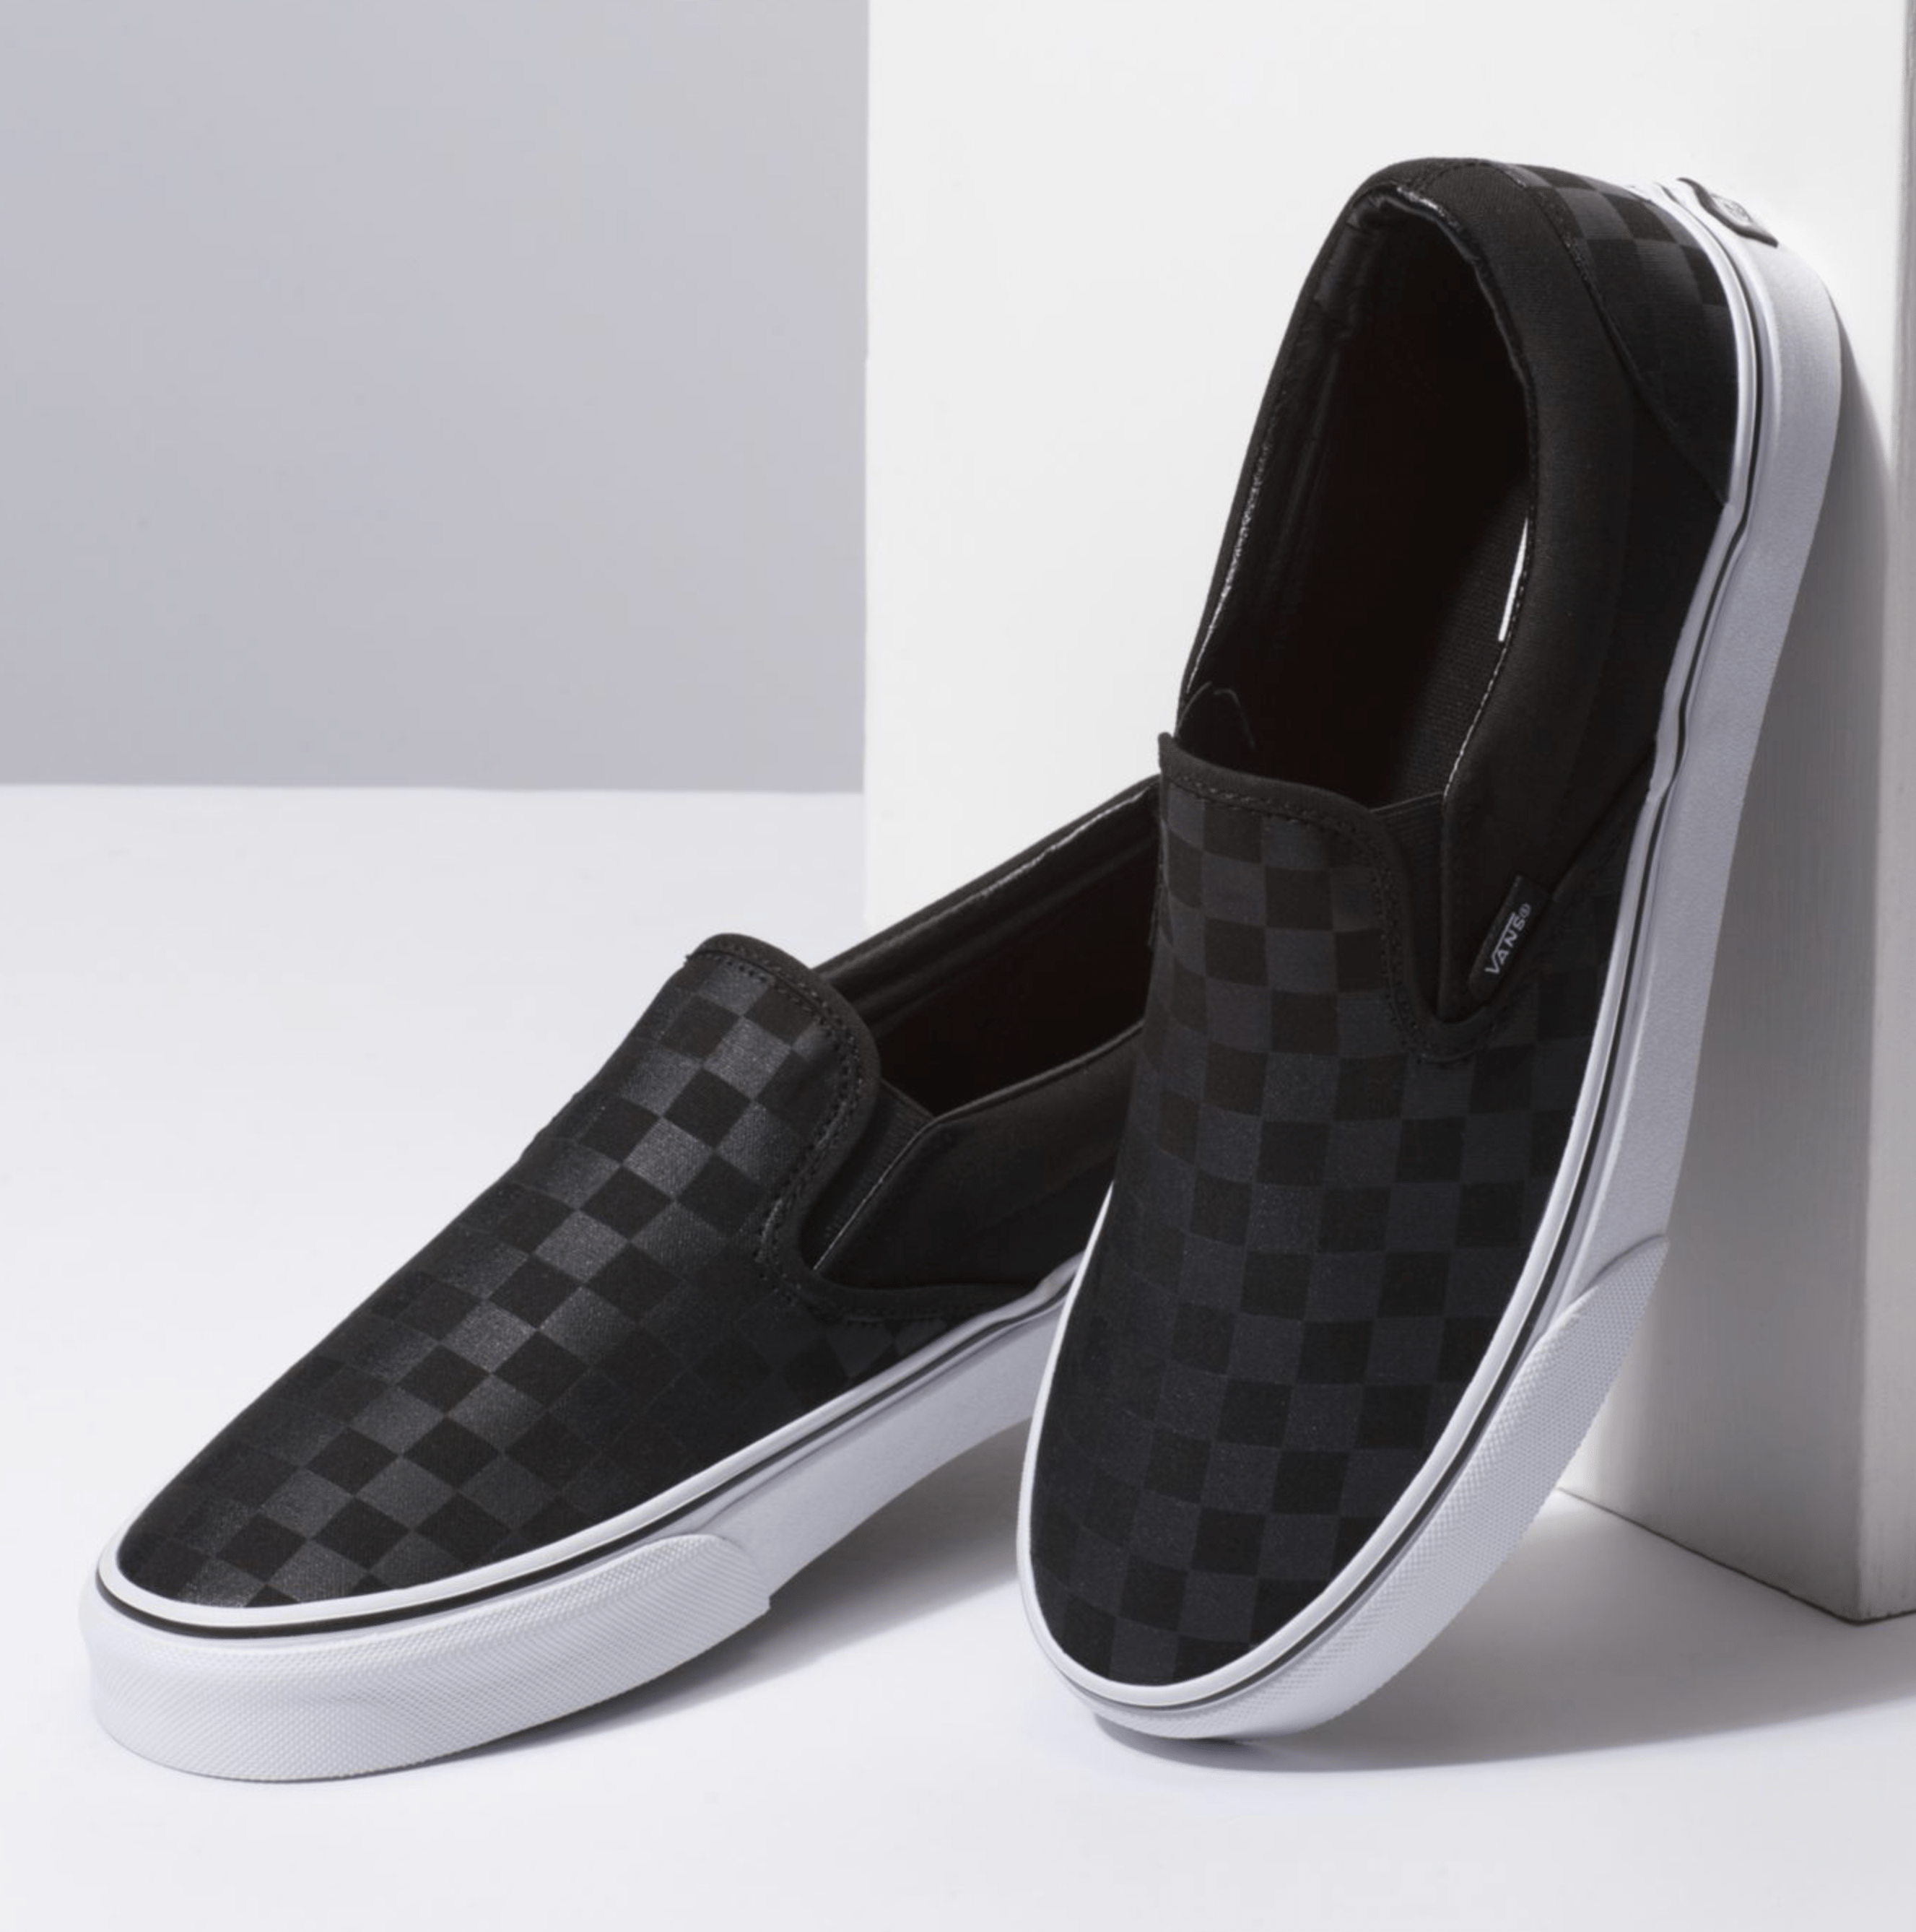 Checkerboard Slip On product image